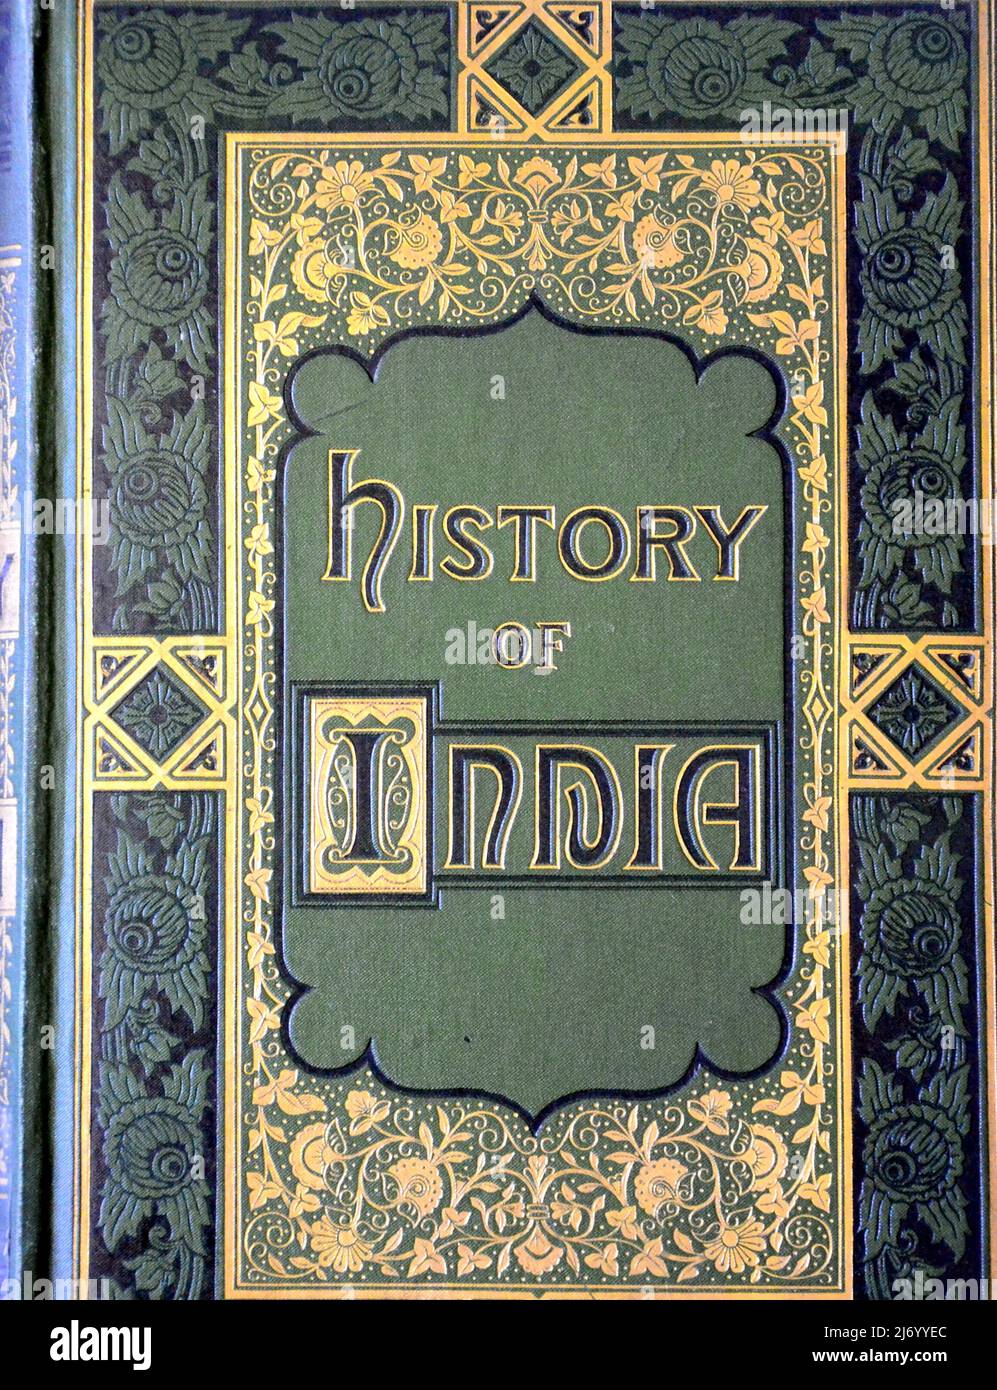 Cover of the book:  'The history of India and of the British Empire in the East' by Edward Henry Nolan, Published by Virtue & Co. Ltd, London, 1861. Stock Photo